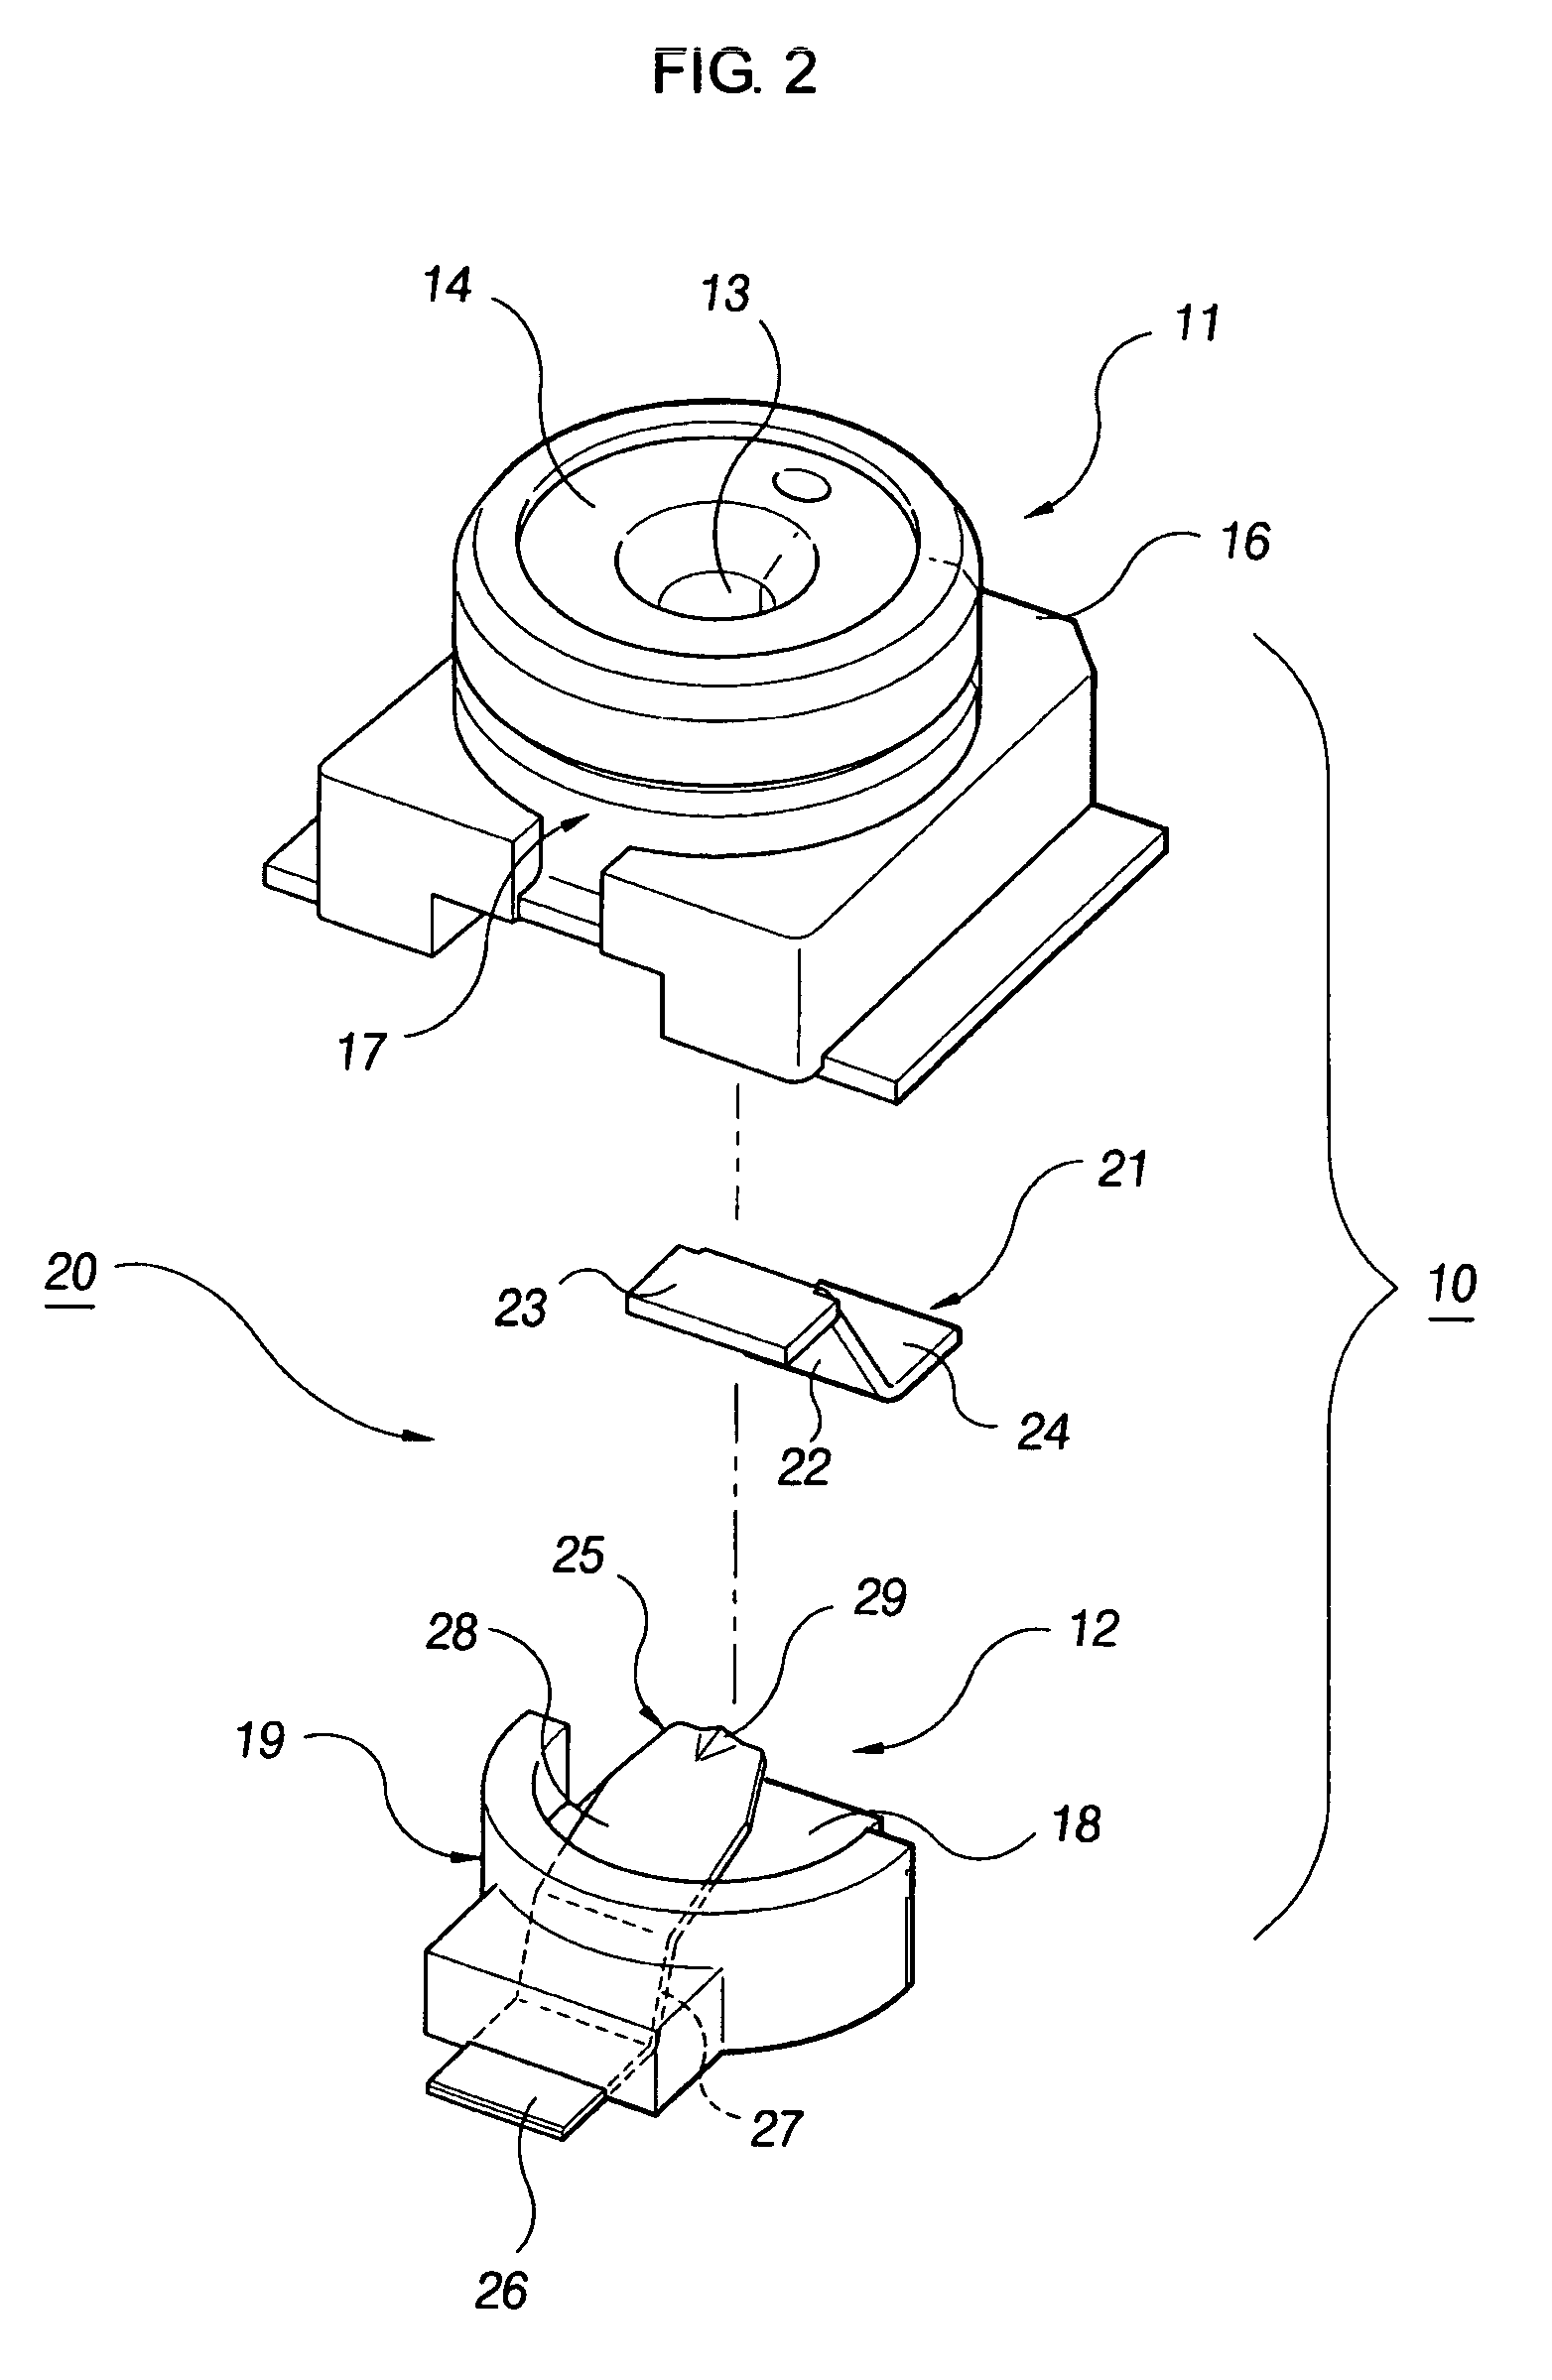 Coaxial connector with RF switch